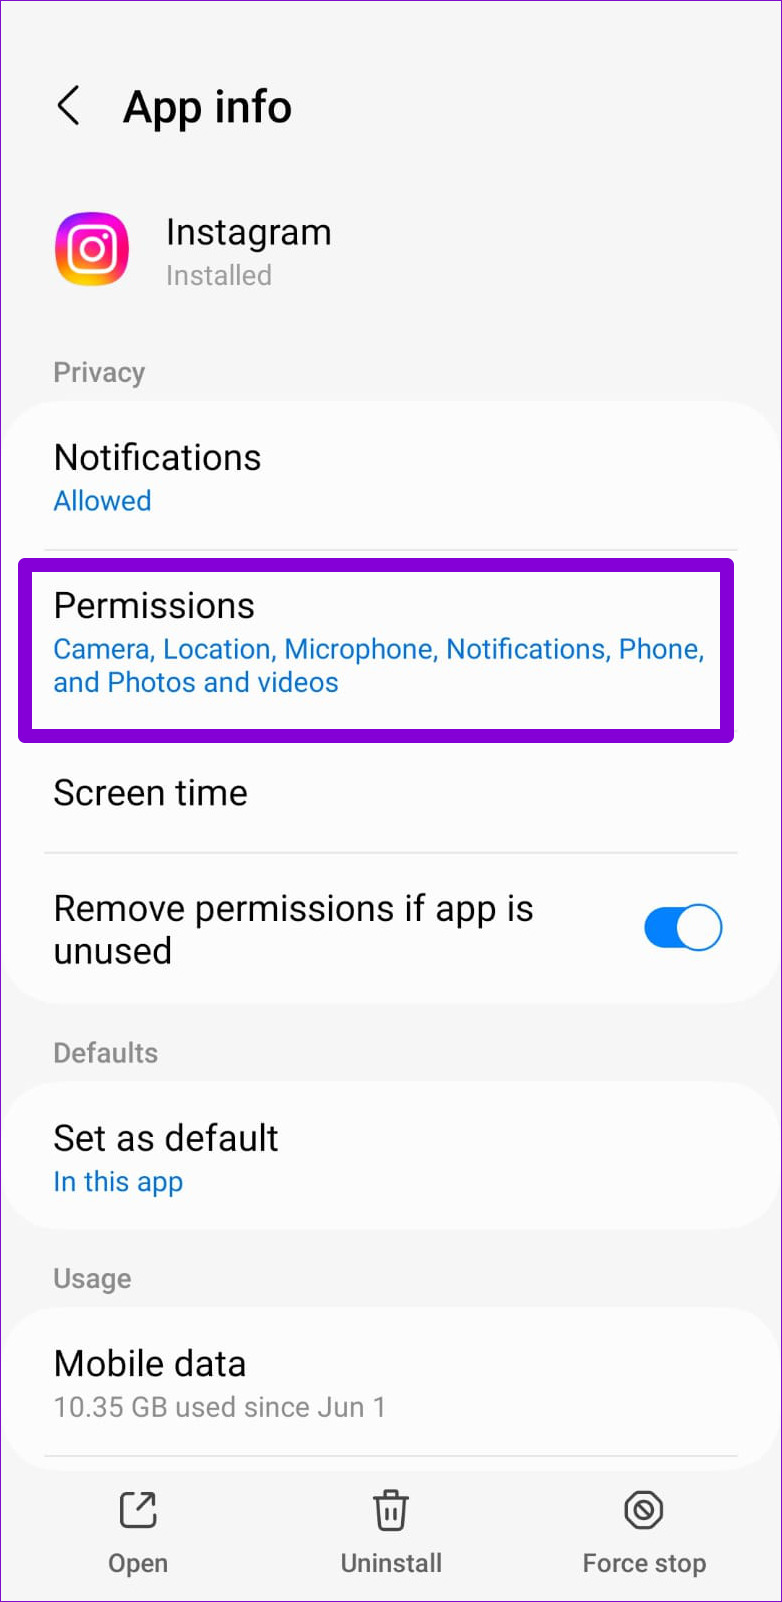 Instagram App Permissions on Android